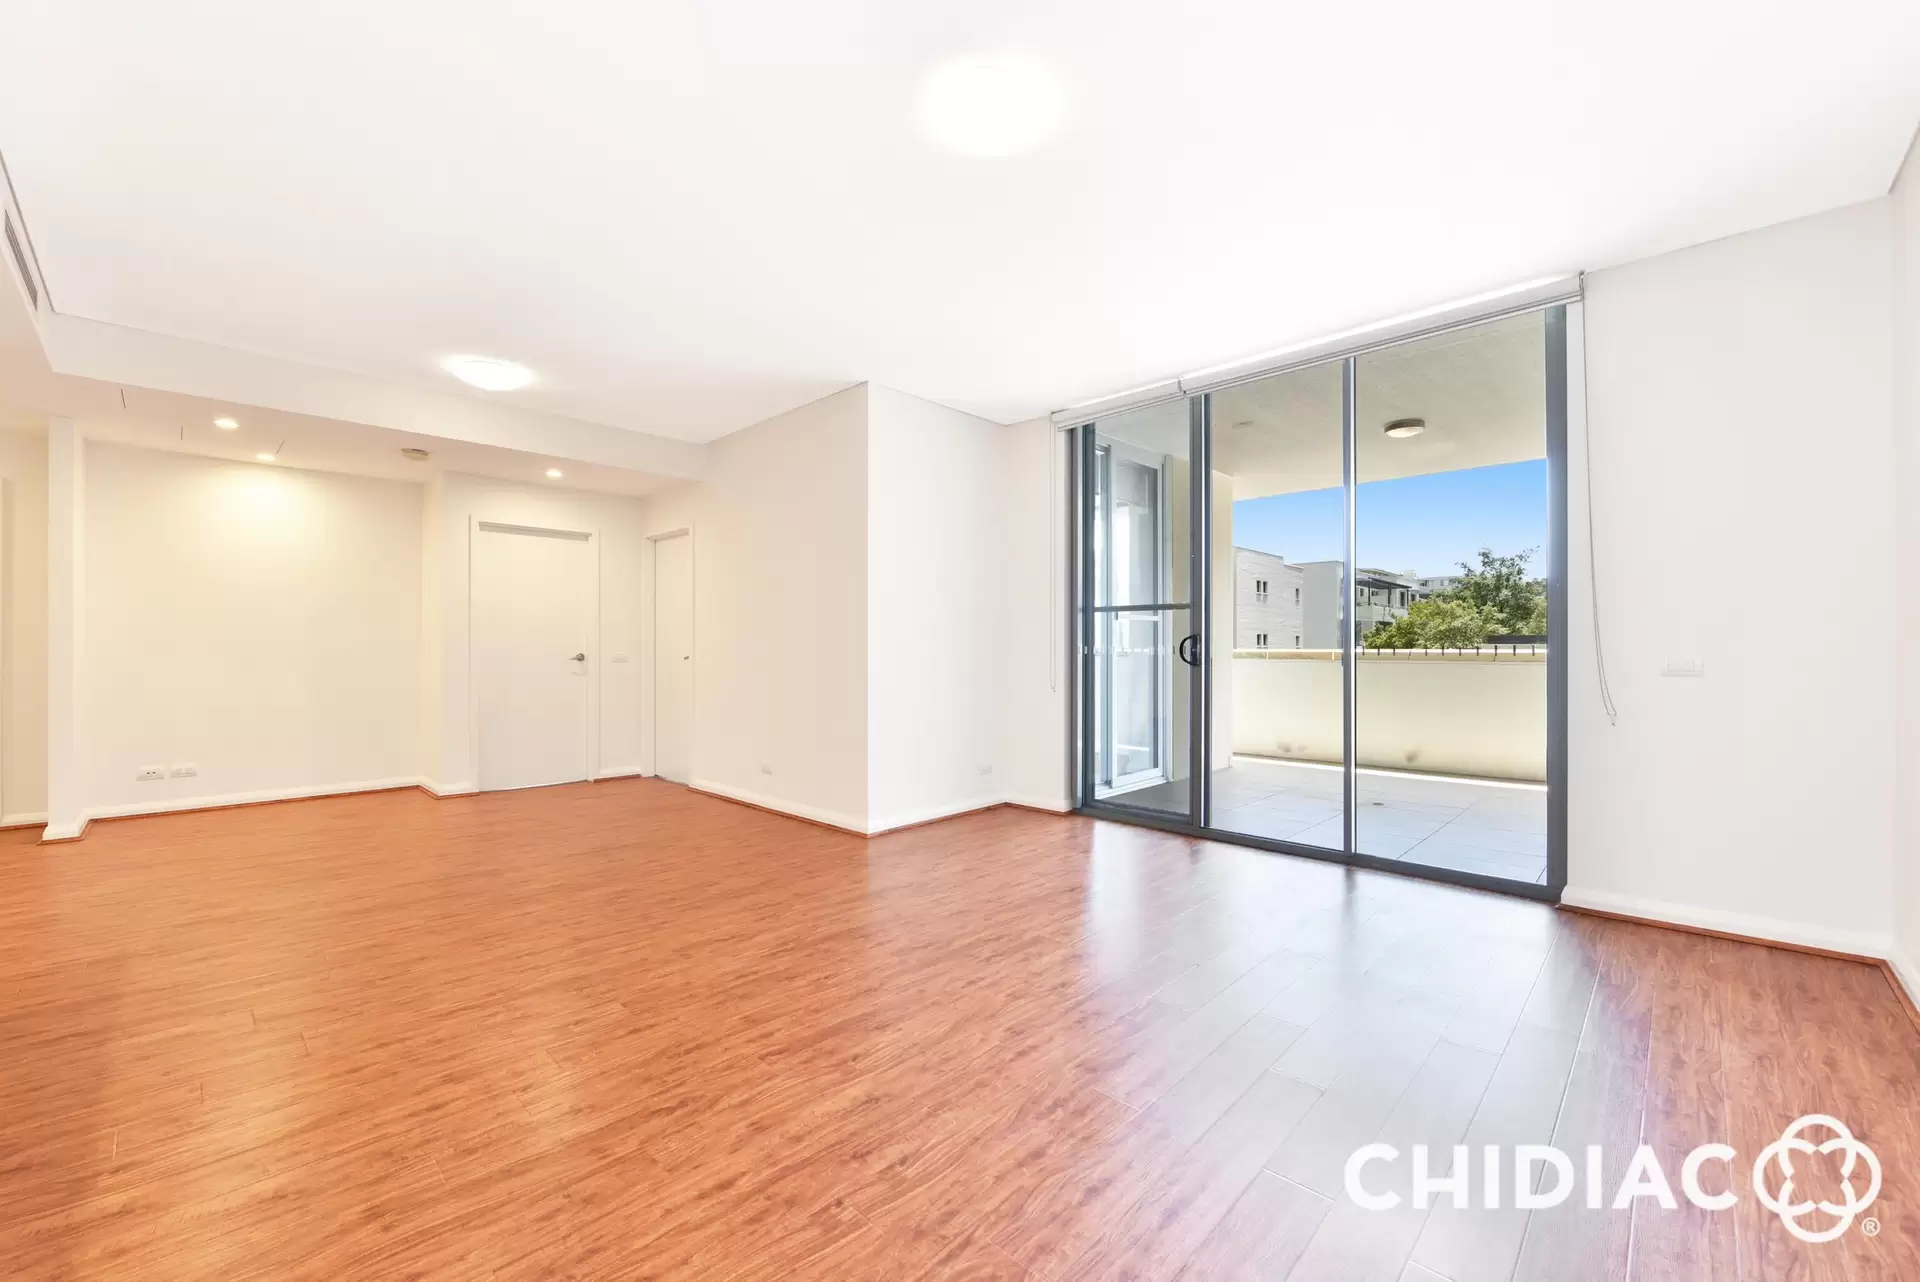 201/8 Marine Parade, Wentworth Point Leased by Chidiac Realty - image 1